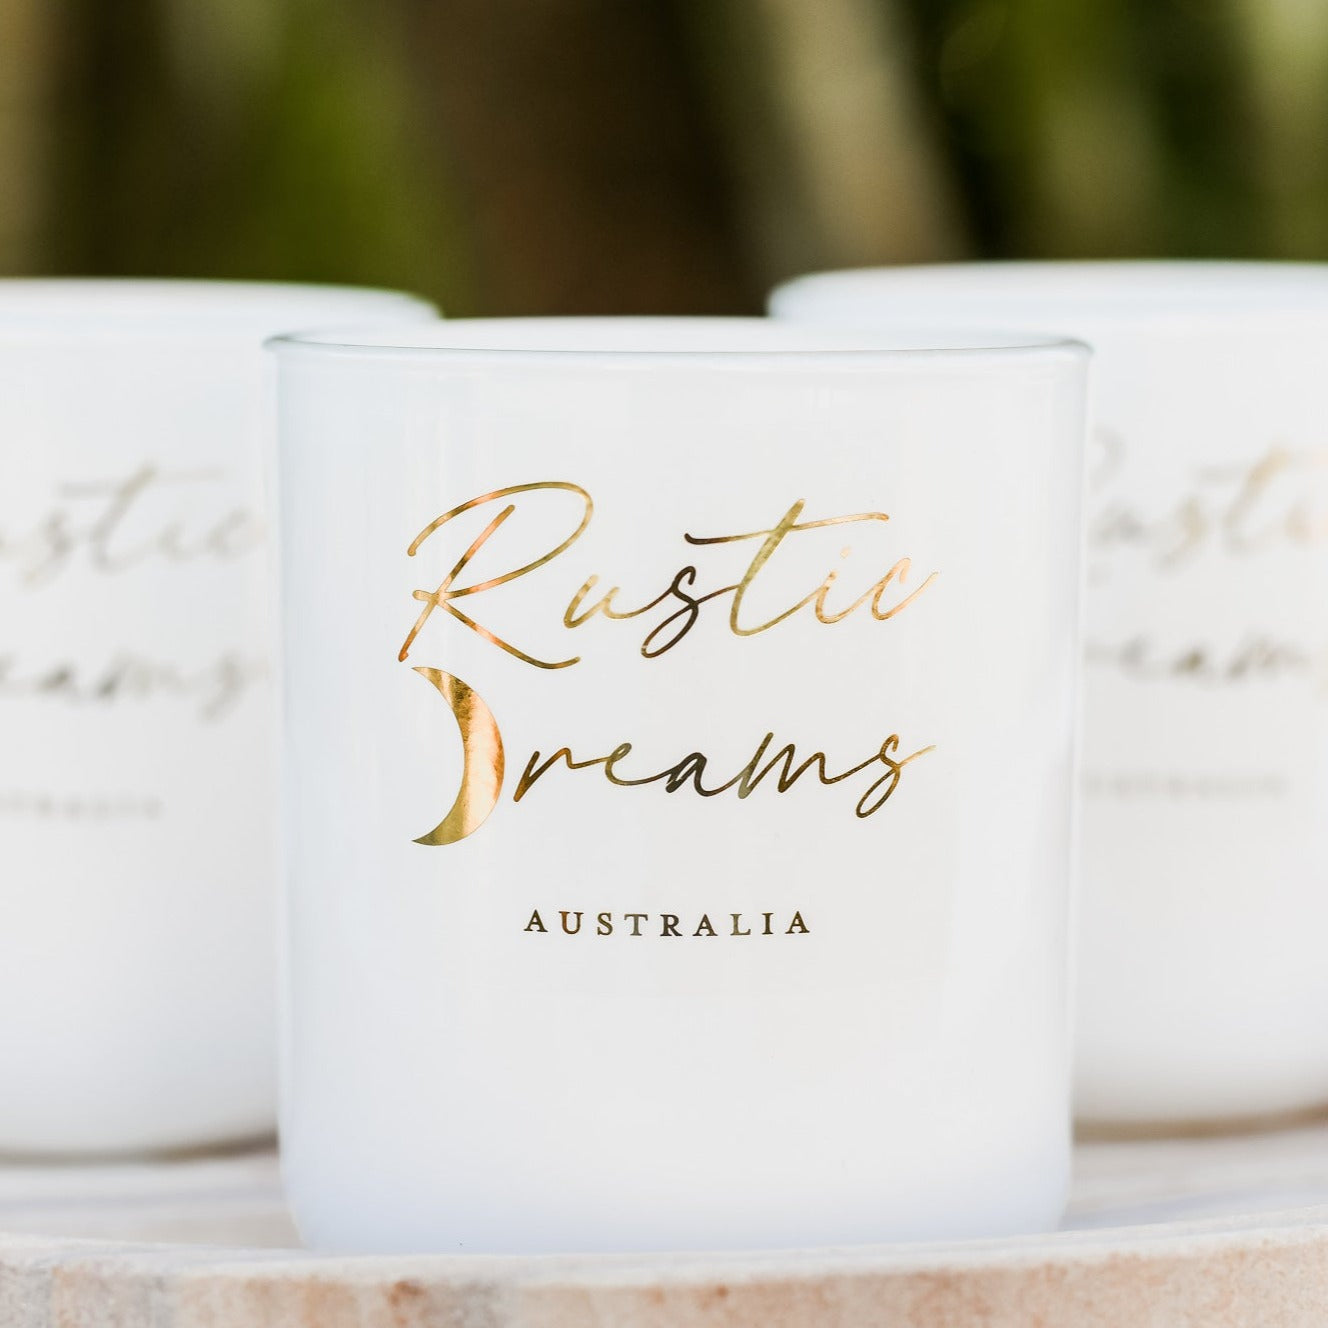 Rustic Dreams Collection - Scented Soy Candles